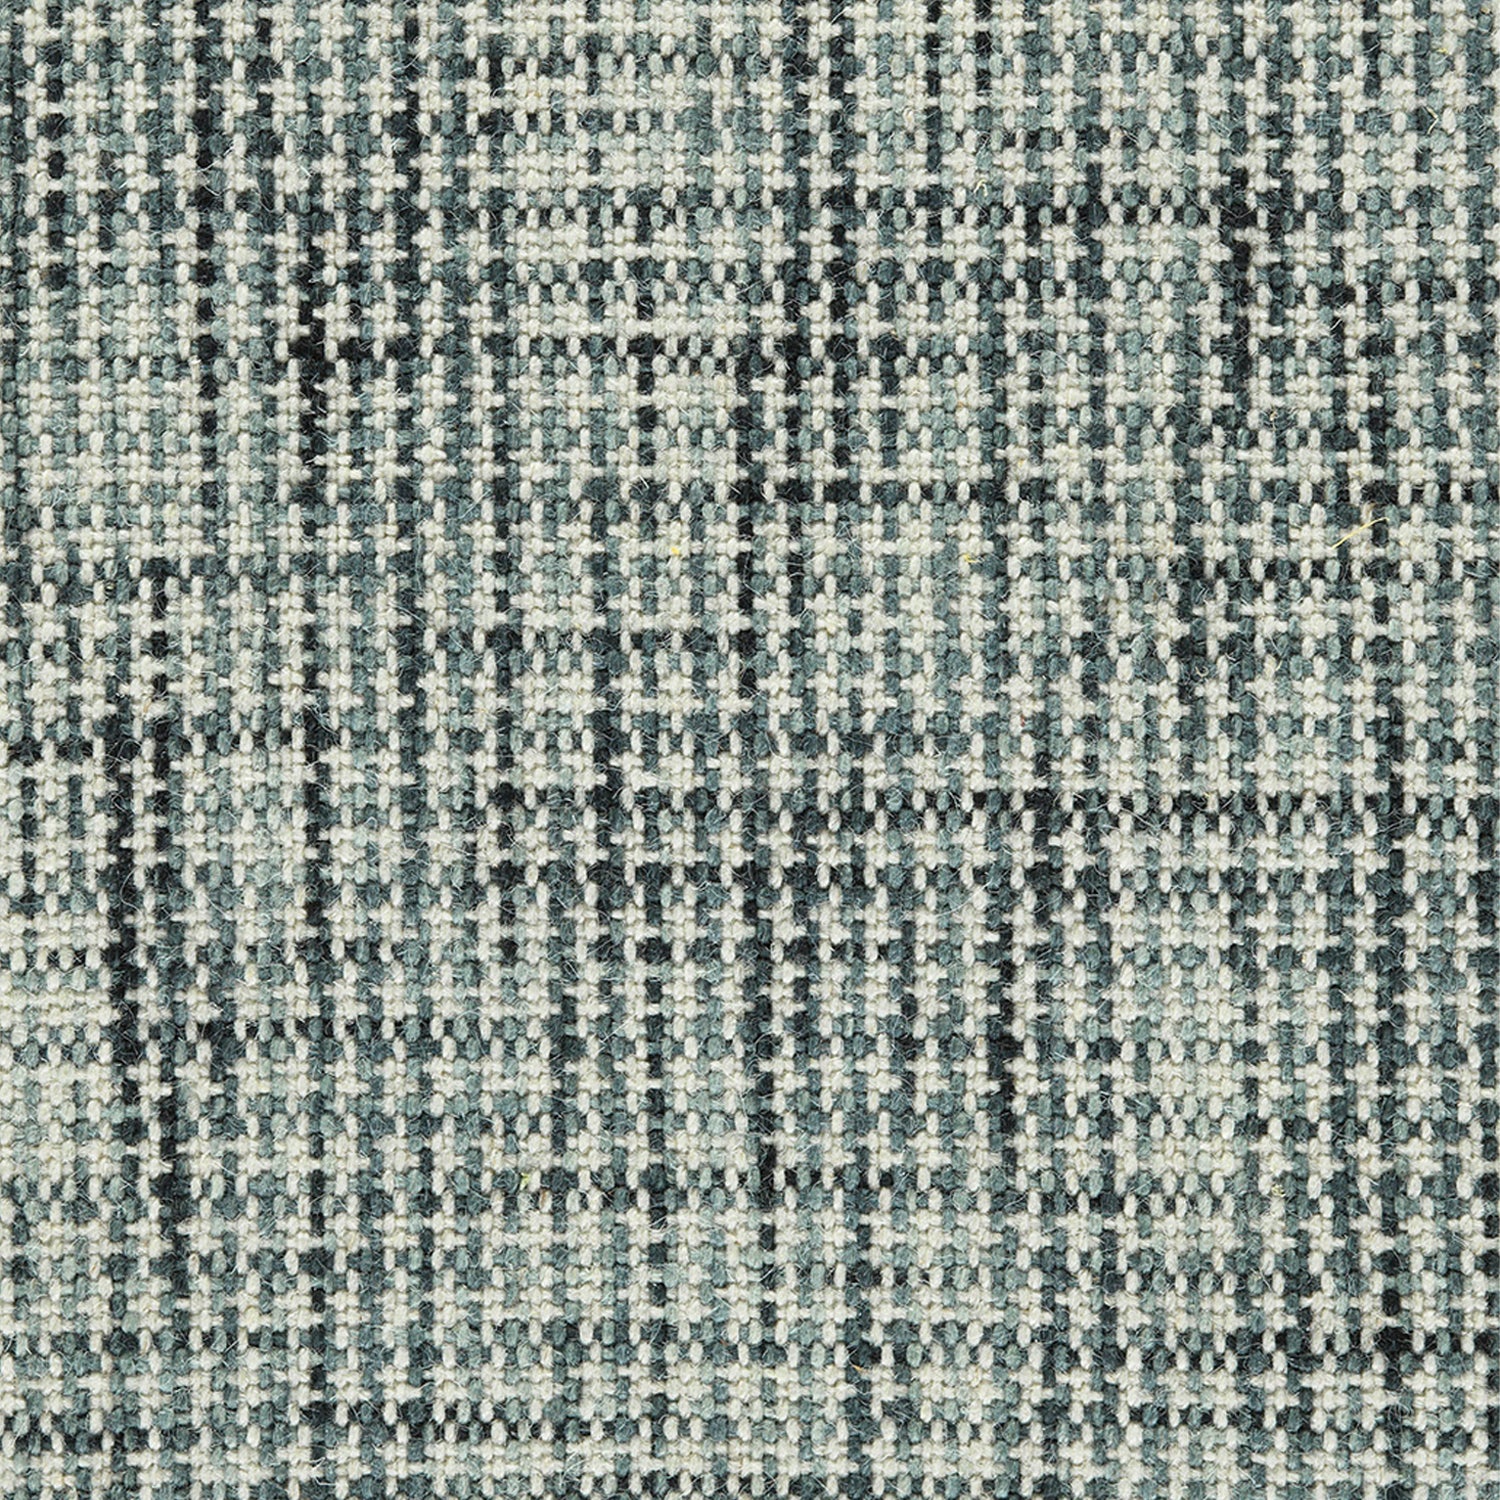 Wool broadloom carpet swatch in a chunky grid weave in mottled shades of white, blue and navy.